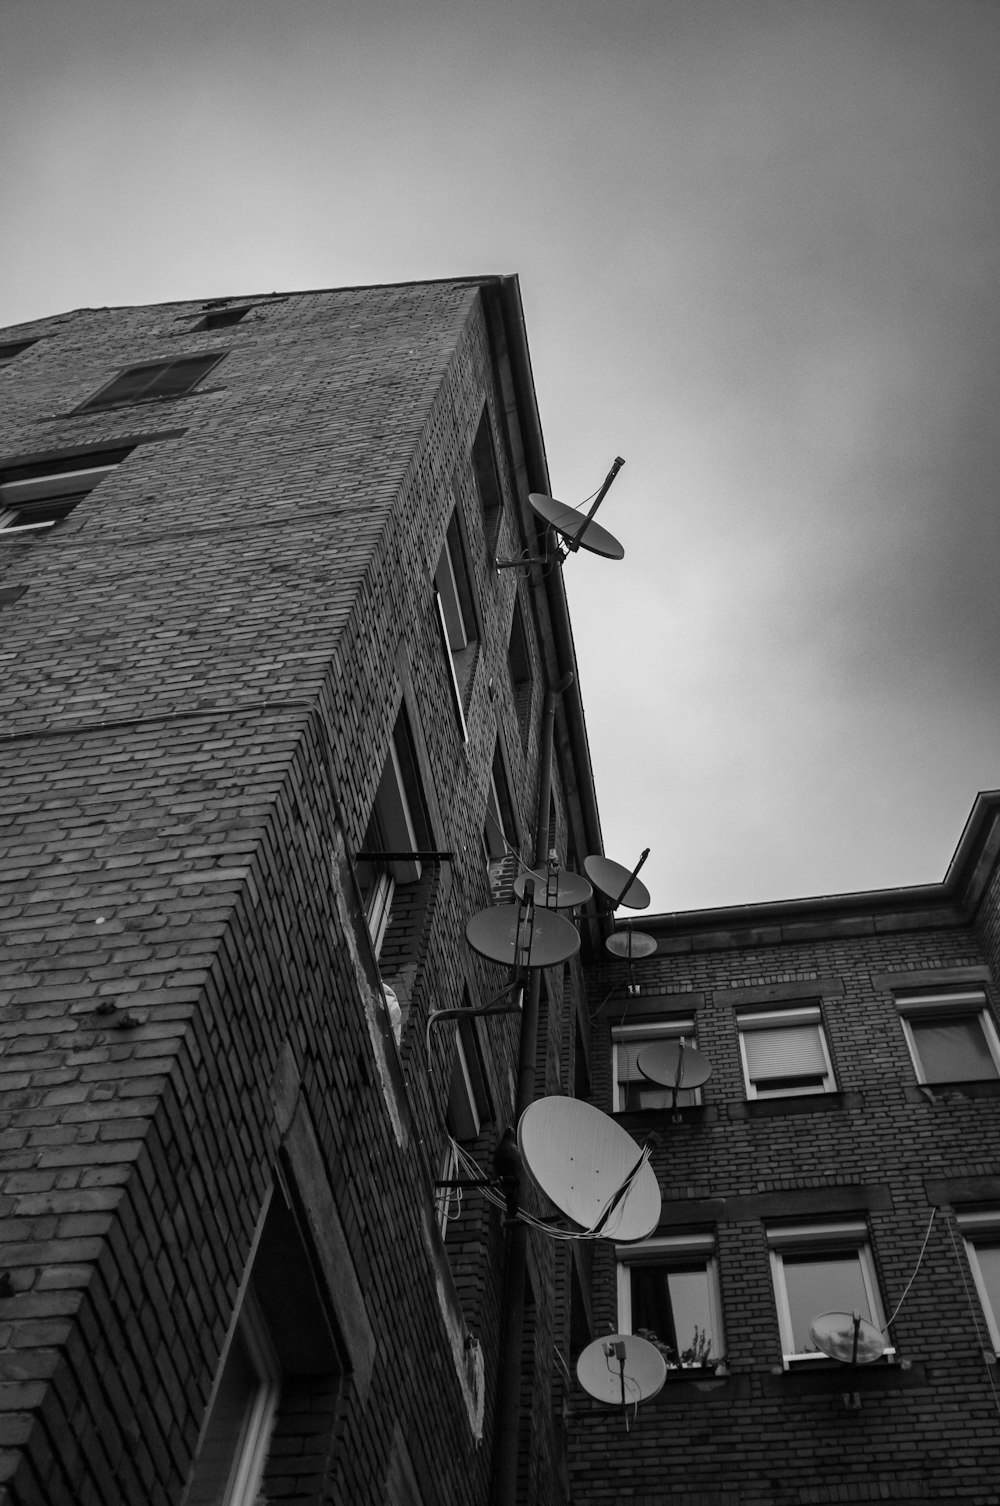 a black and white photo of a satellite dish on the side of a building